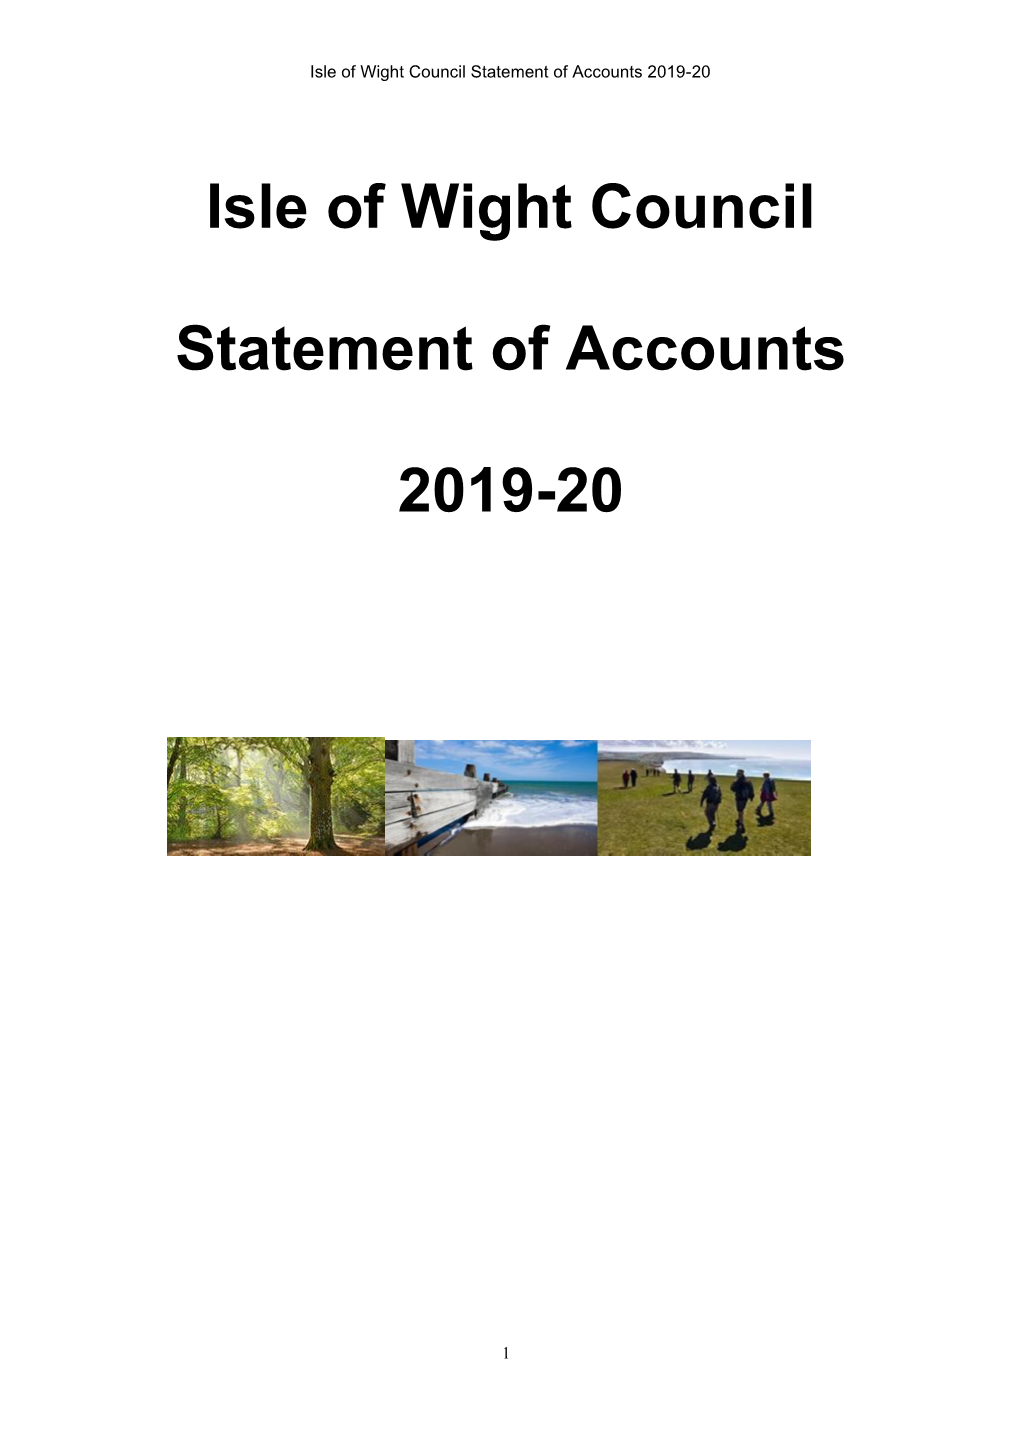 Isle of Wight Council Statement of Accounts 2019-20